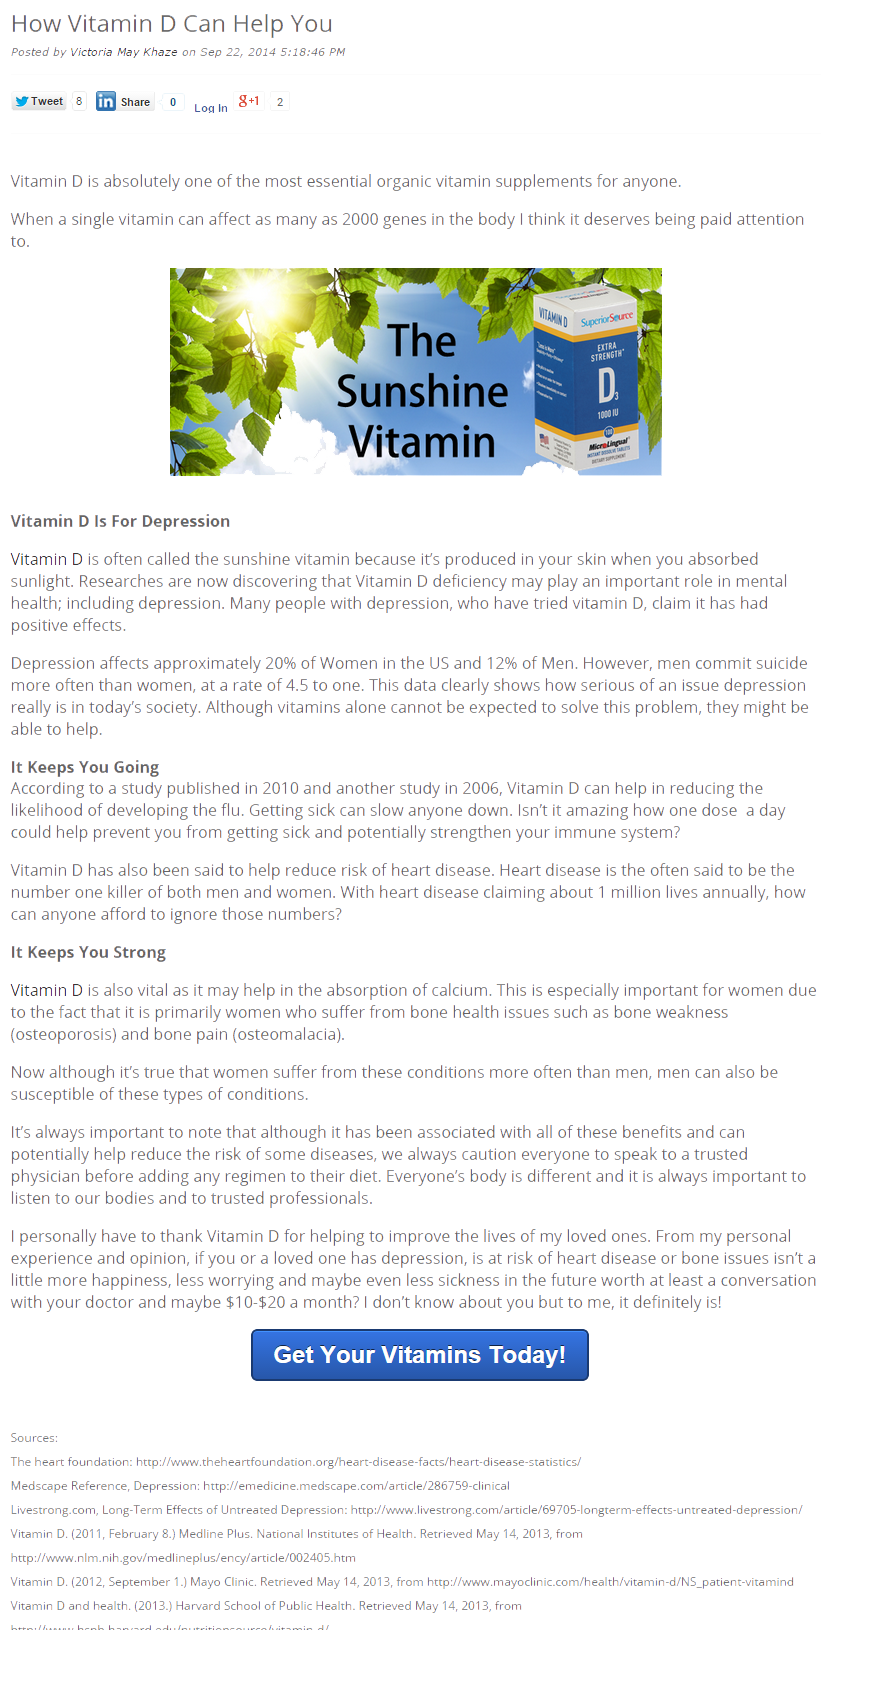 How vitamin D can help you